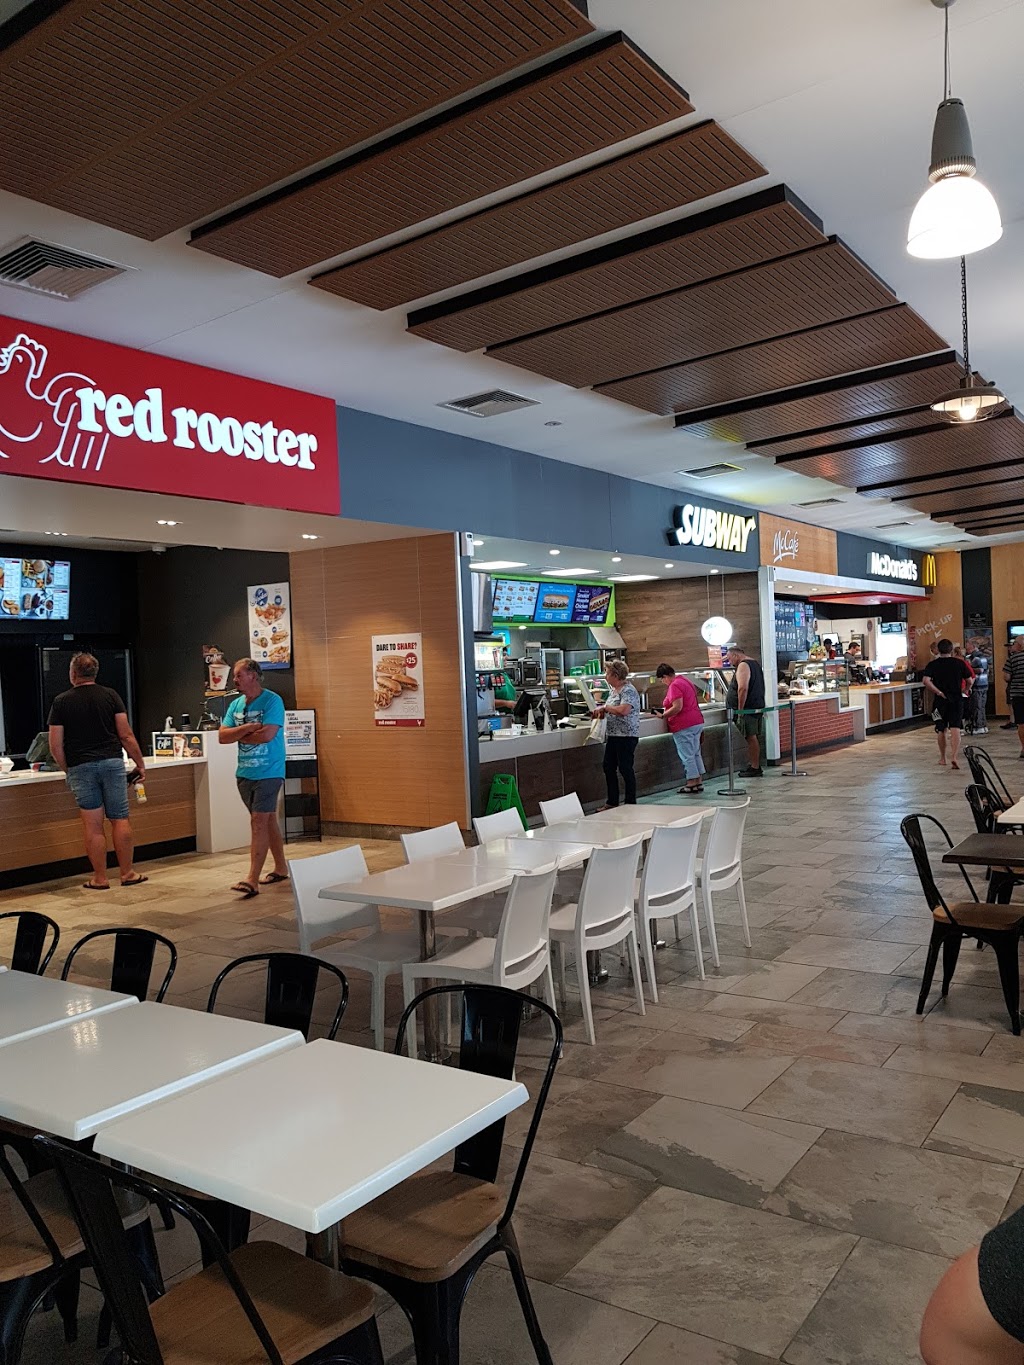 McDonalds Kempsey South Service Centre | cafe | 511 Pacific Hwy, South Kempsey NSW 2440, Australia | 0265627539 OR +61 2 6562 7539